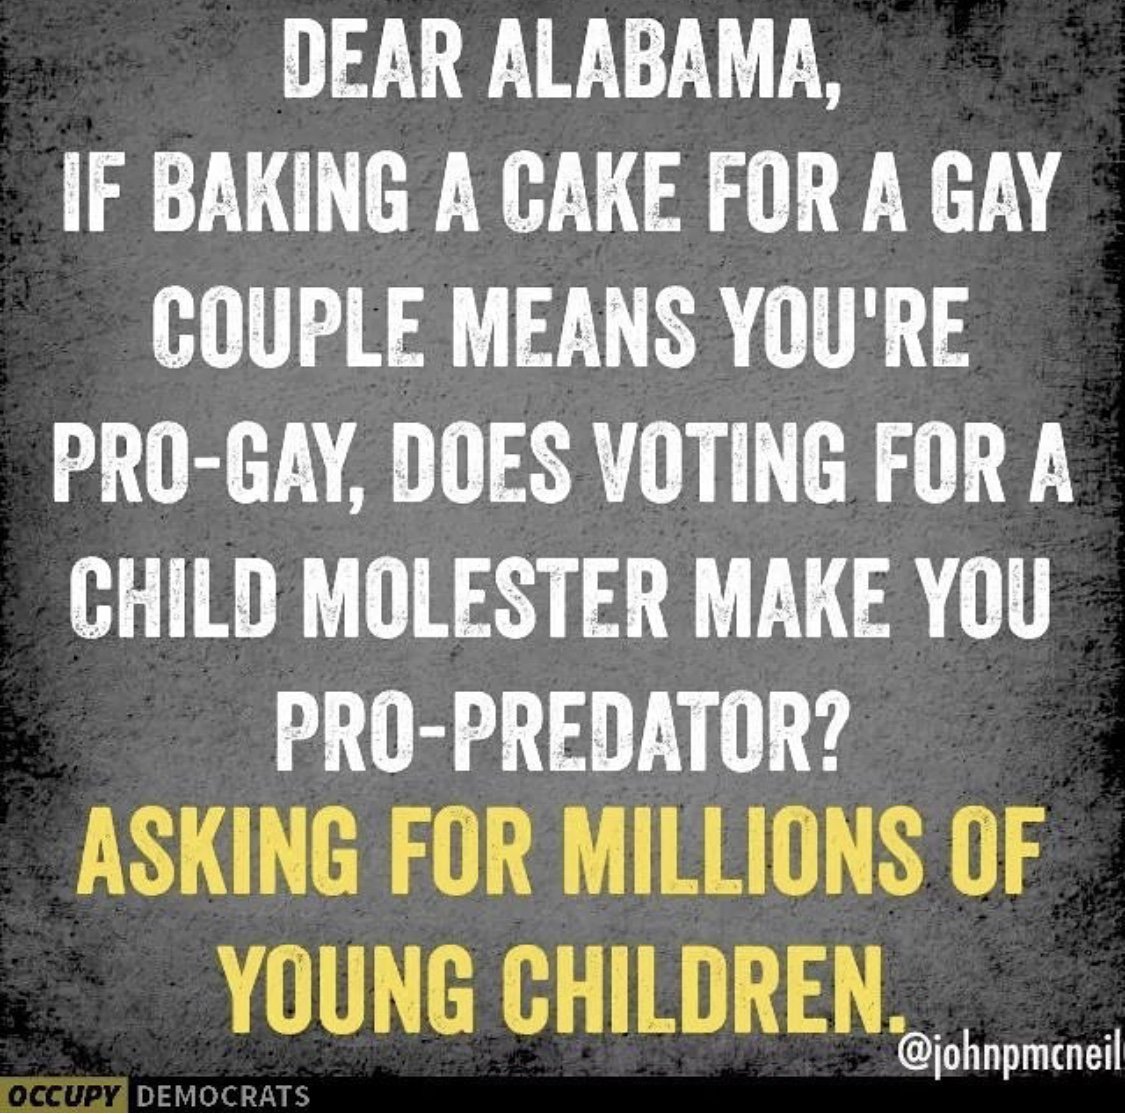 RT @OGCherLovely: @cher Something to think about Alabama before you vote! https://t.co/tjI8cLChEs